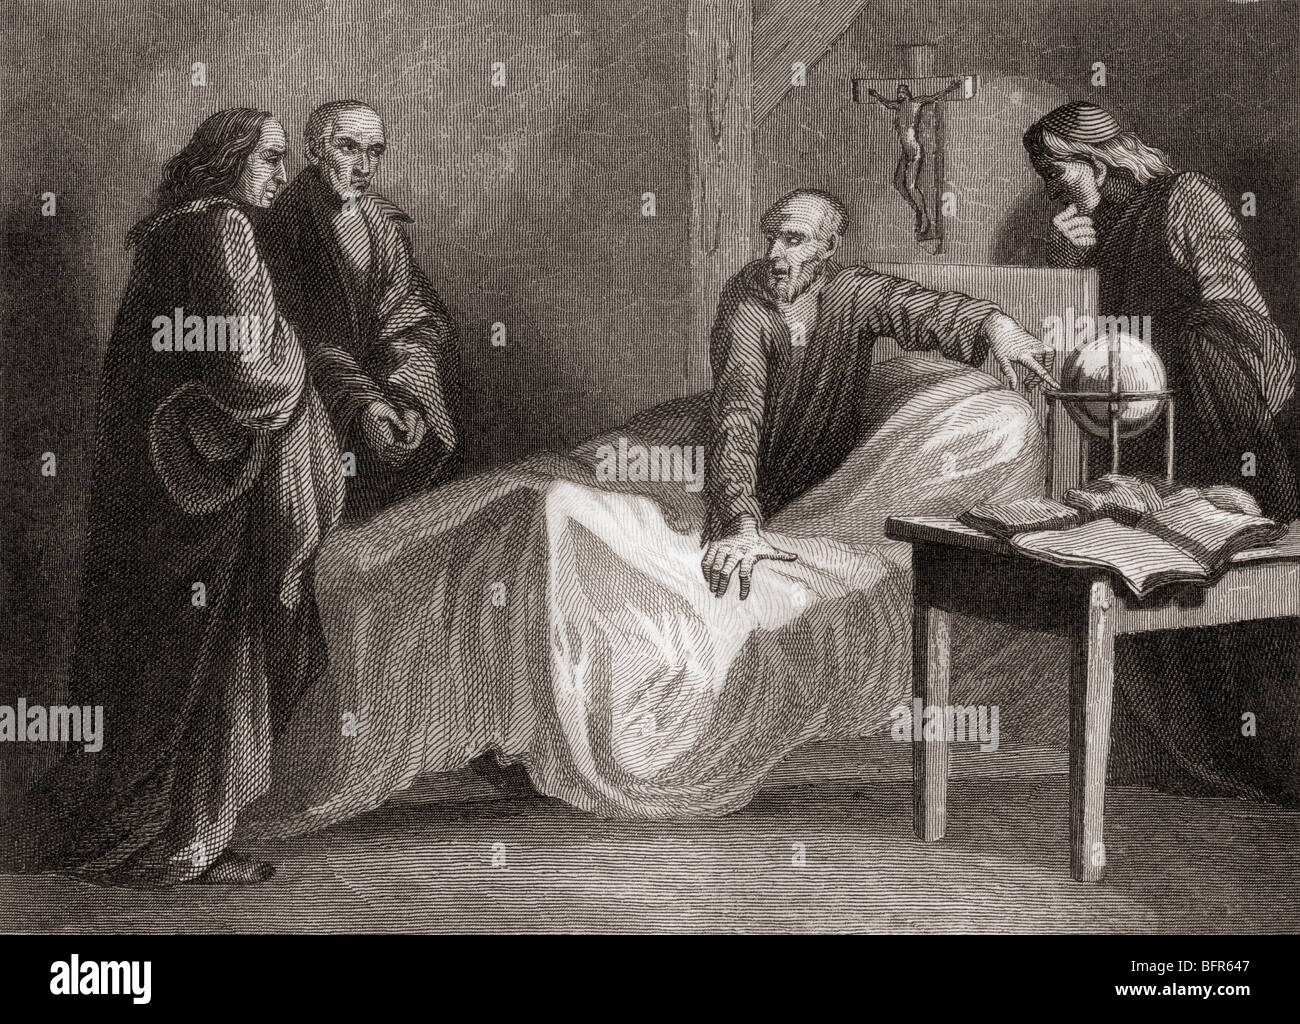 Death of Saint Ignatius of Loyola, 1491 to 1556.  Spanish knight, hermit, priest and founder of the Society of Jesus. Stock Photo